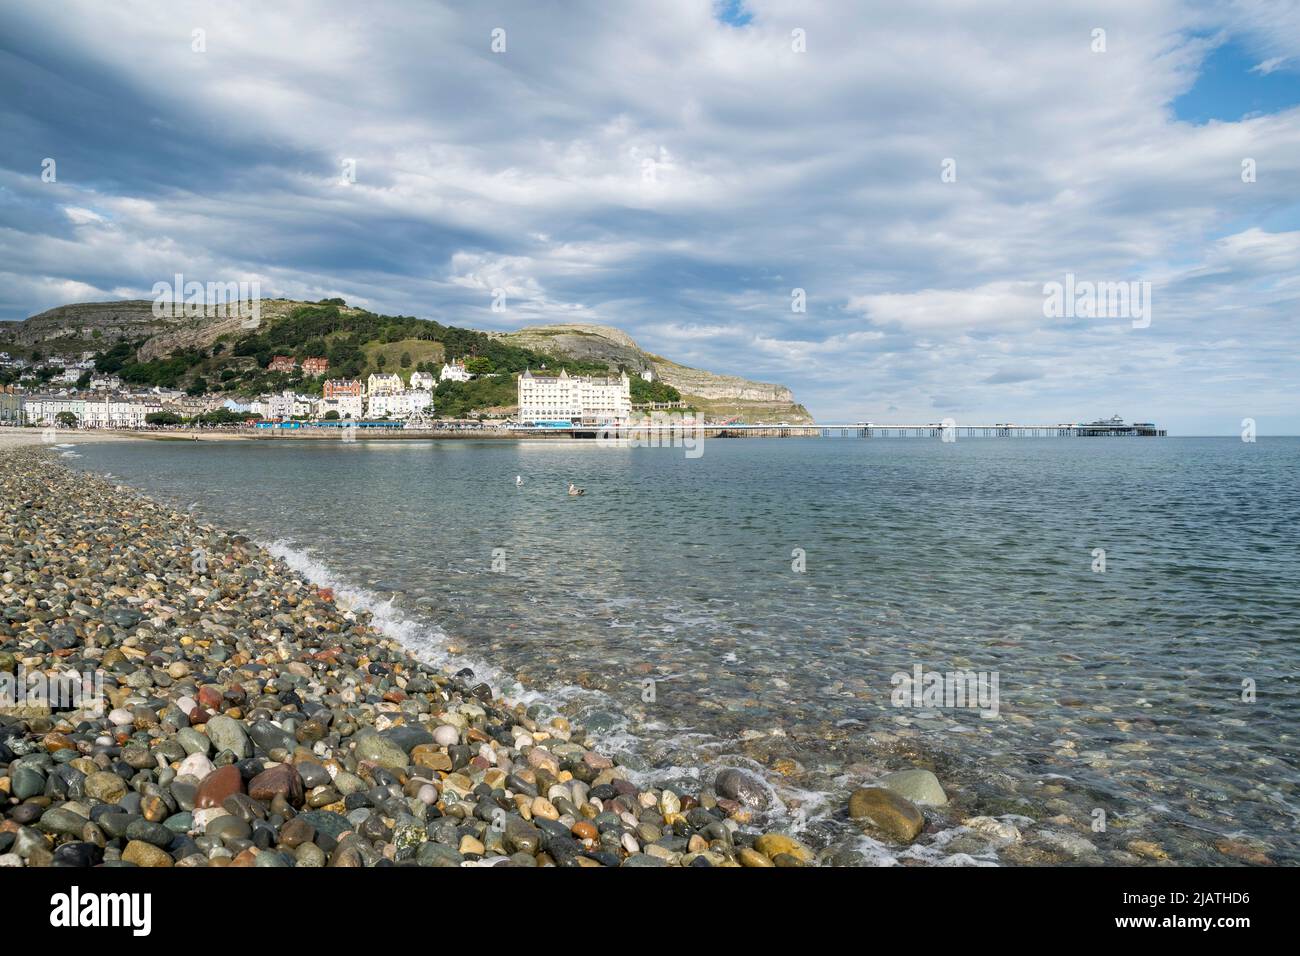 Llandudno promenade on the North Wales coast with the new ferris wheel and the pier in the distance Stock Photo